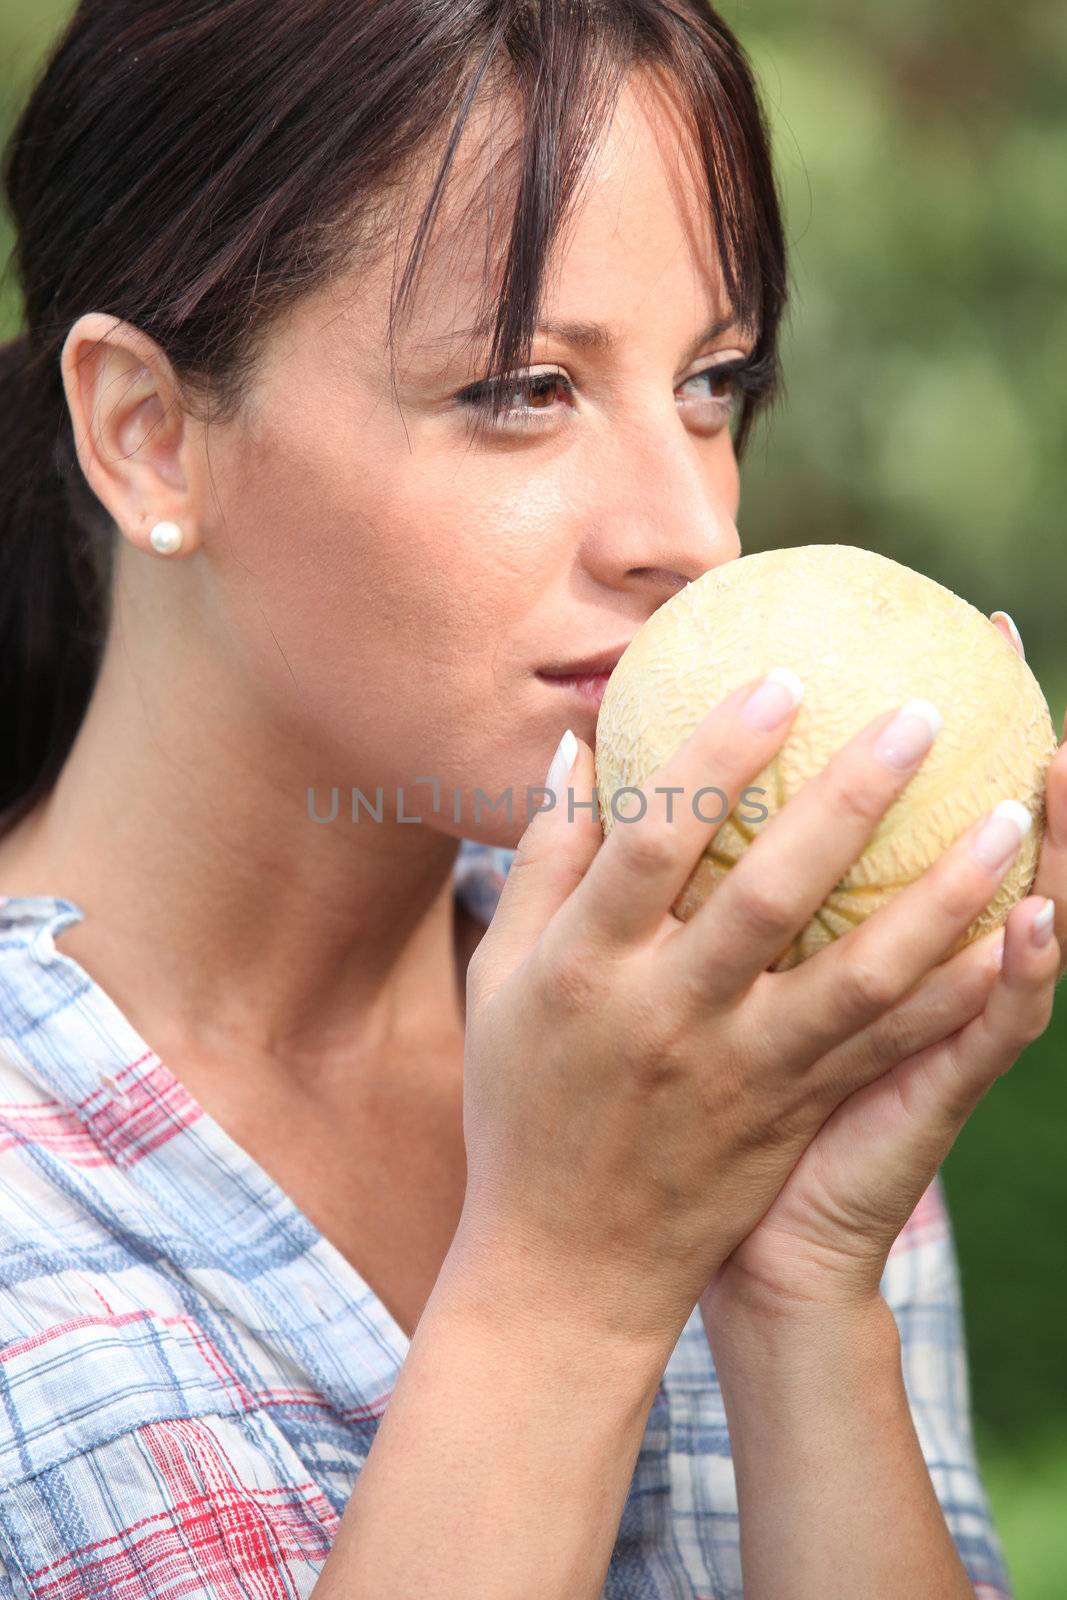 Young woman smelling a melon